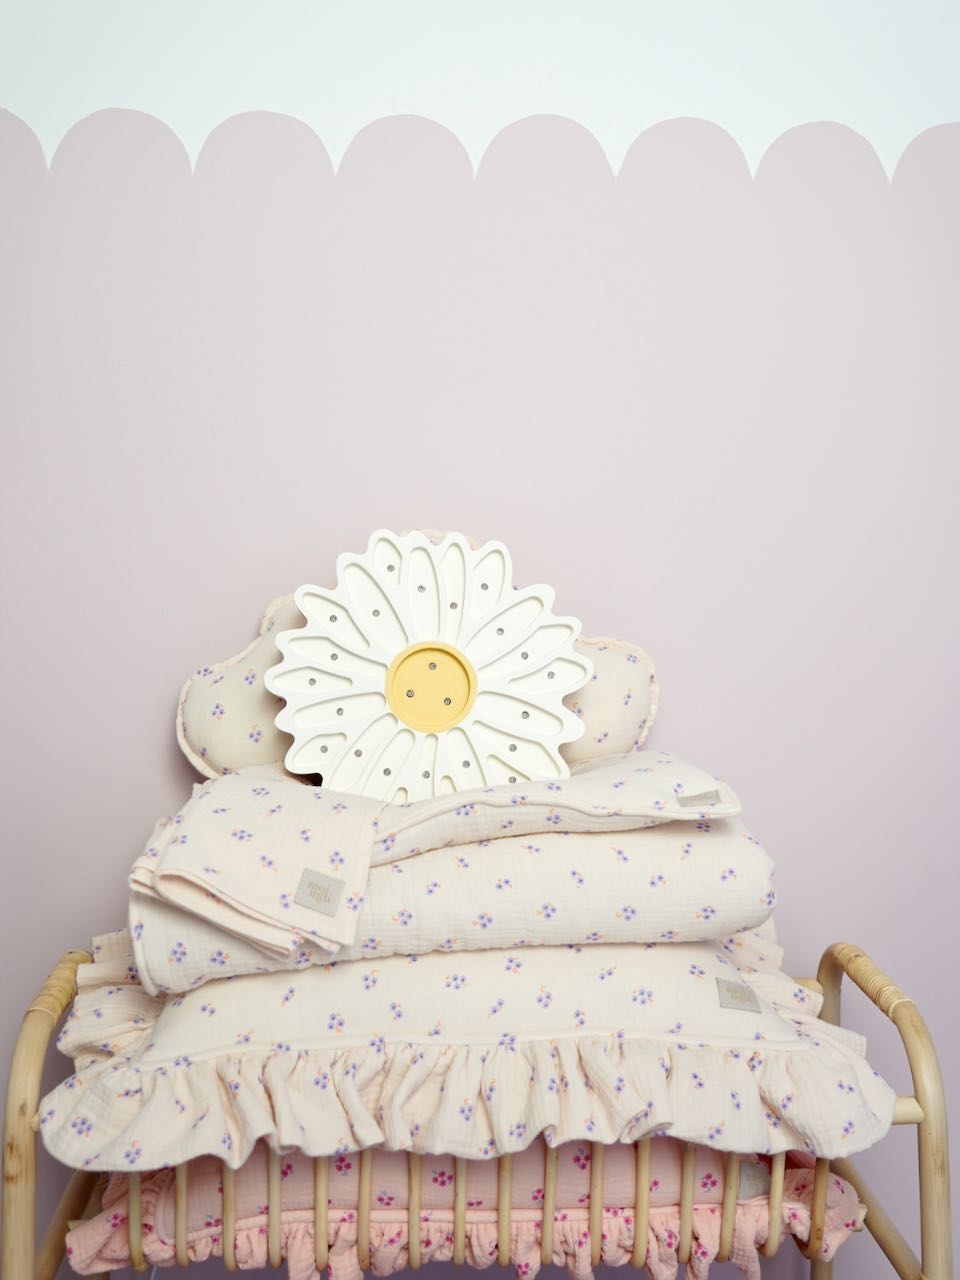 "Purple forget-me-not" Muslin Pillow with Frill